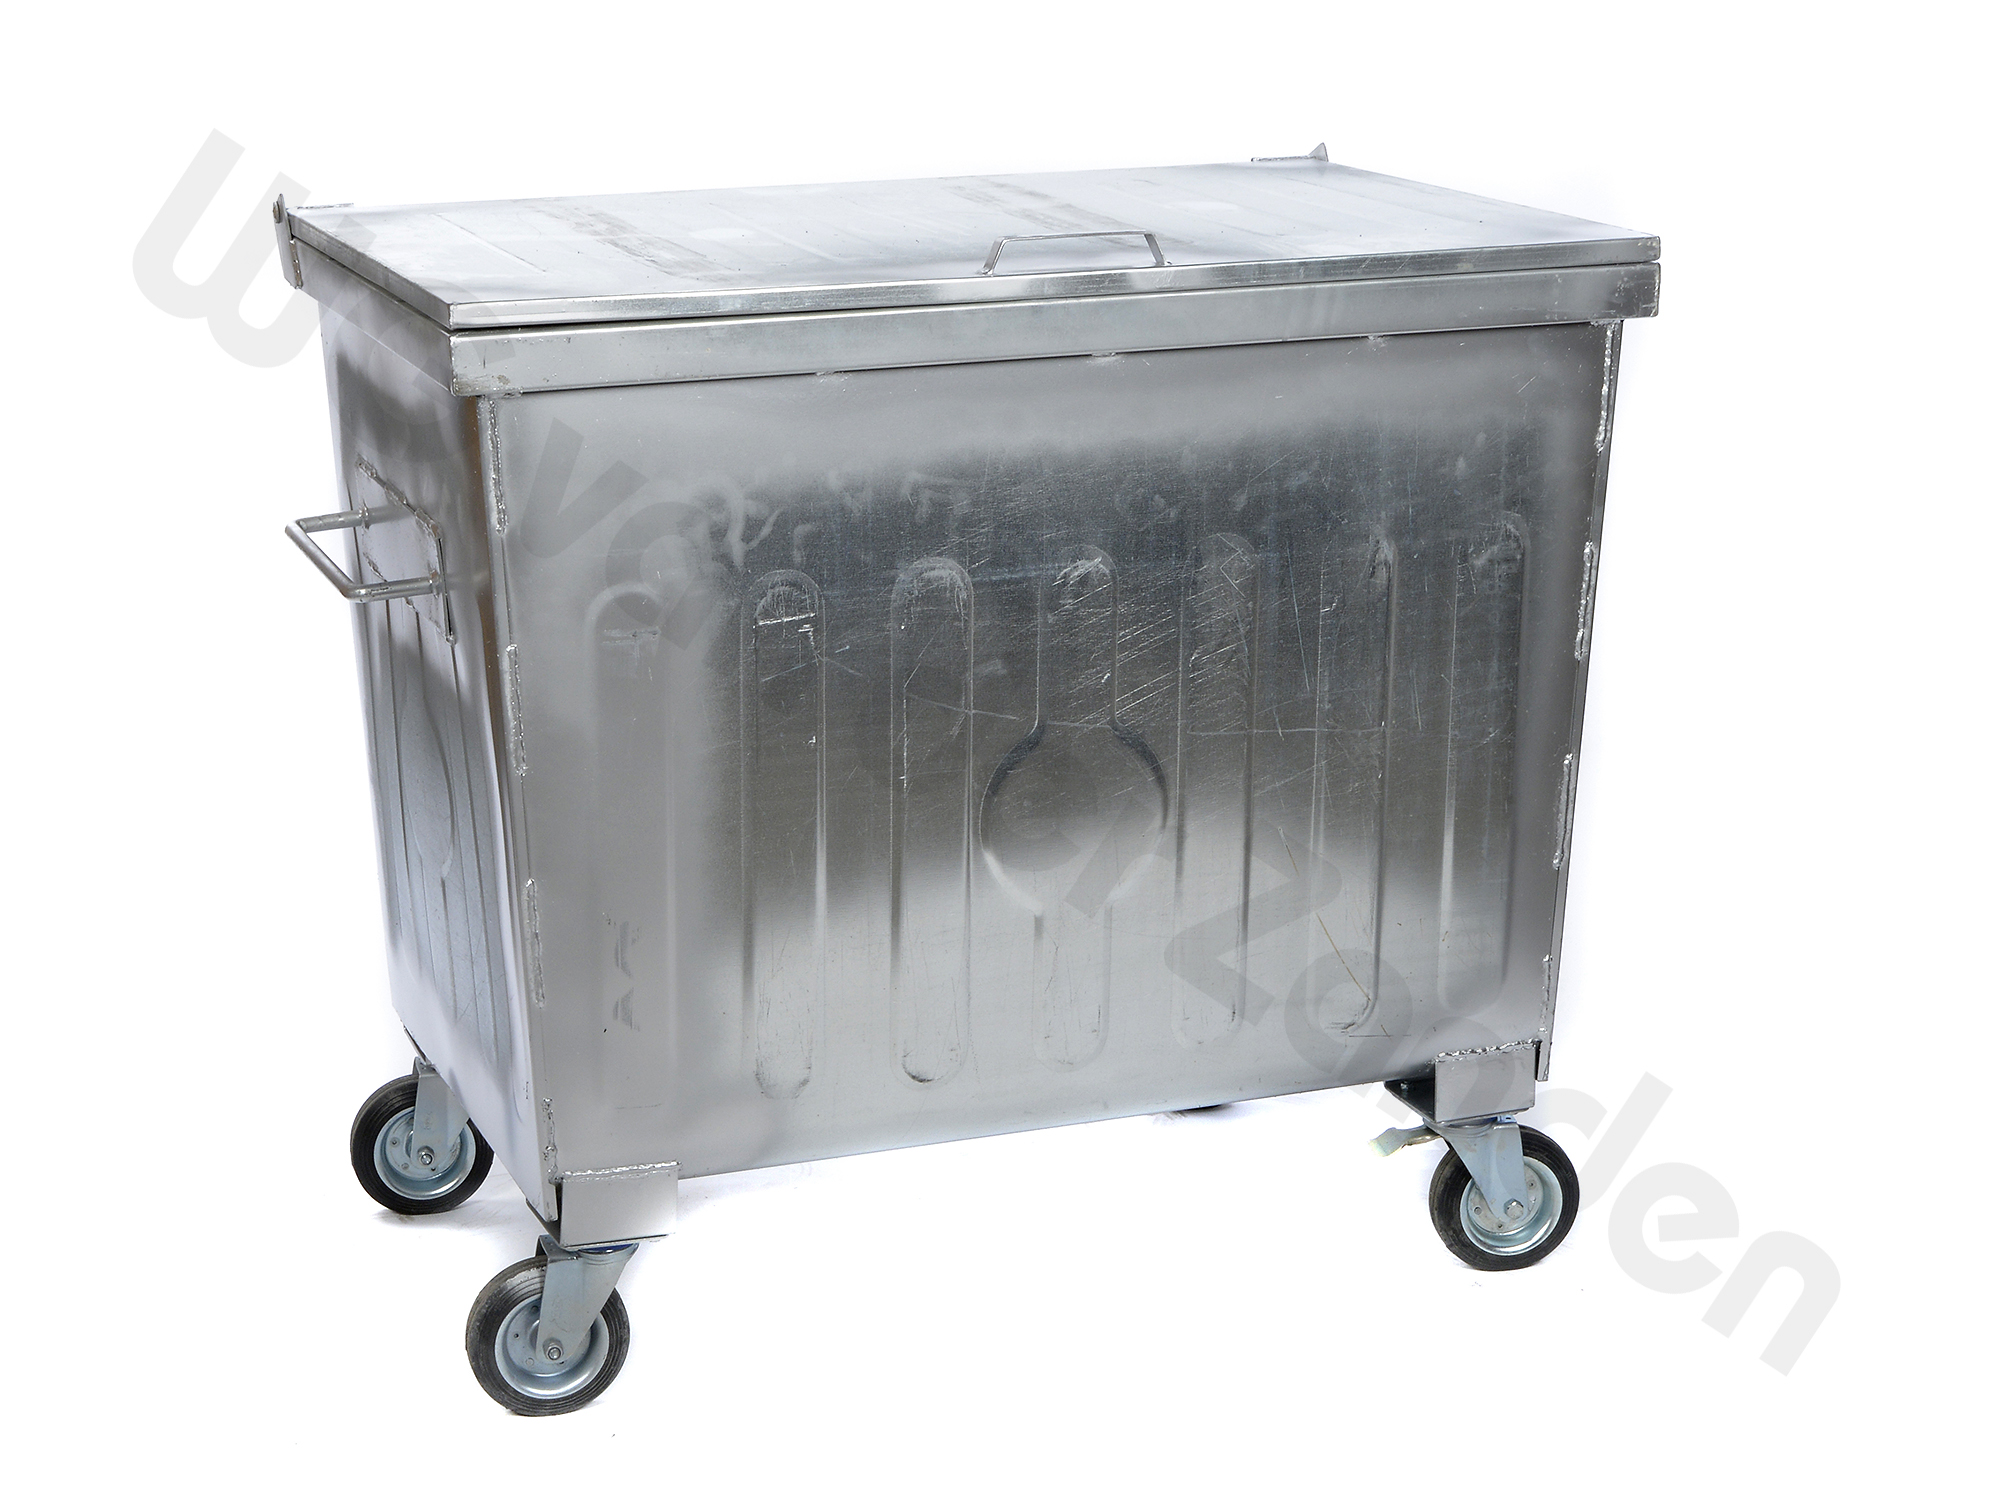 440454 GARBAGE CONTAINER 600 LTR GALV. STEEL  WHEELED